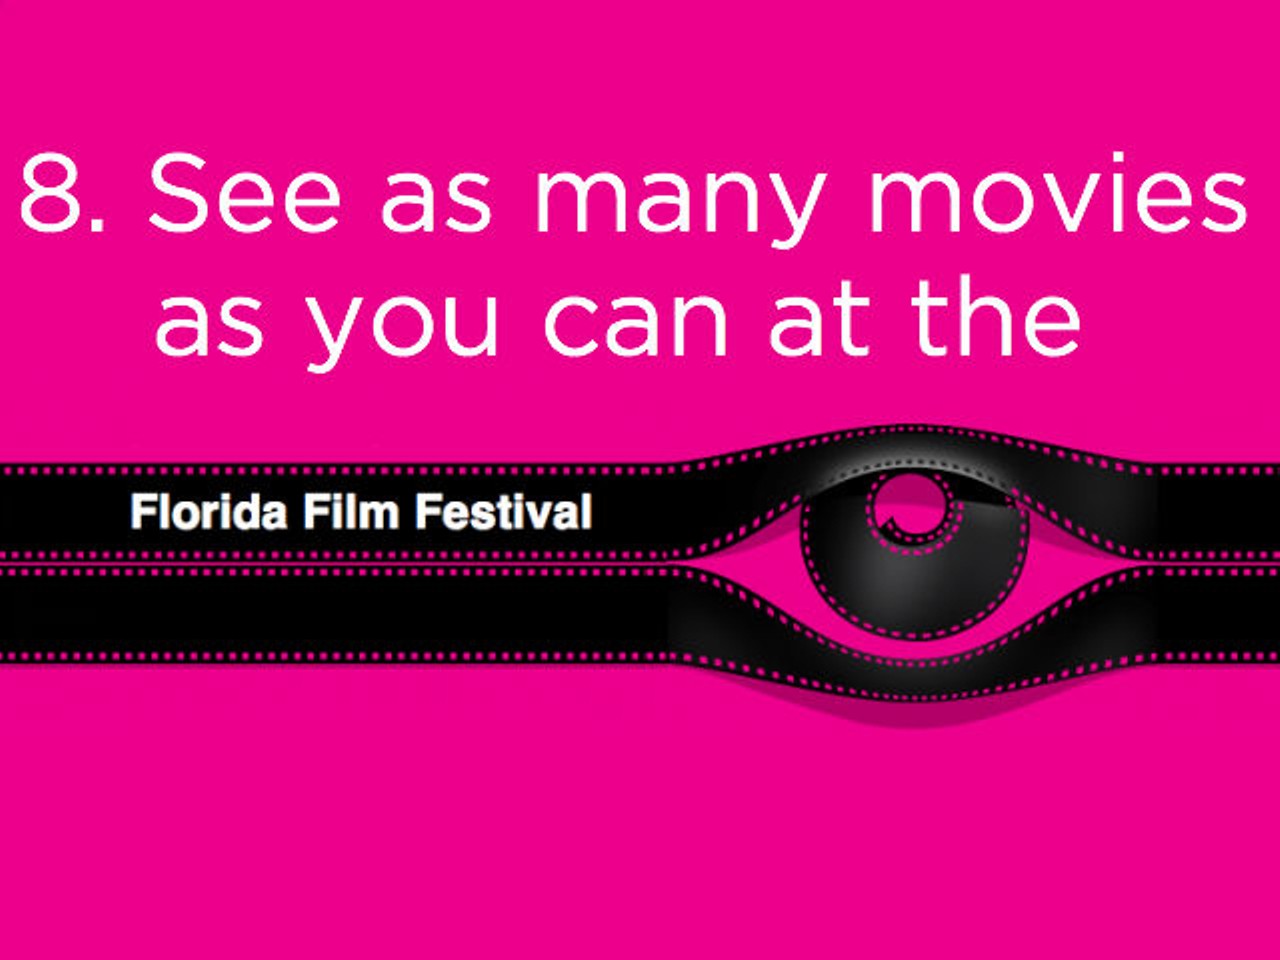 8. See as many movies as you can at the Florida Film Festival, more than two decades old and still going strong. (April 4-13, 2014, Enzian Theater, 1300 S. Orlando Ave., Maitland, floridafilmfestival.com)